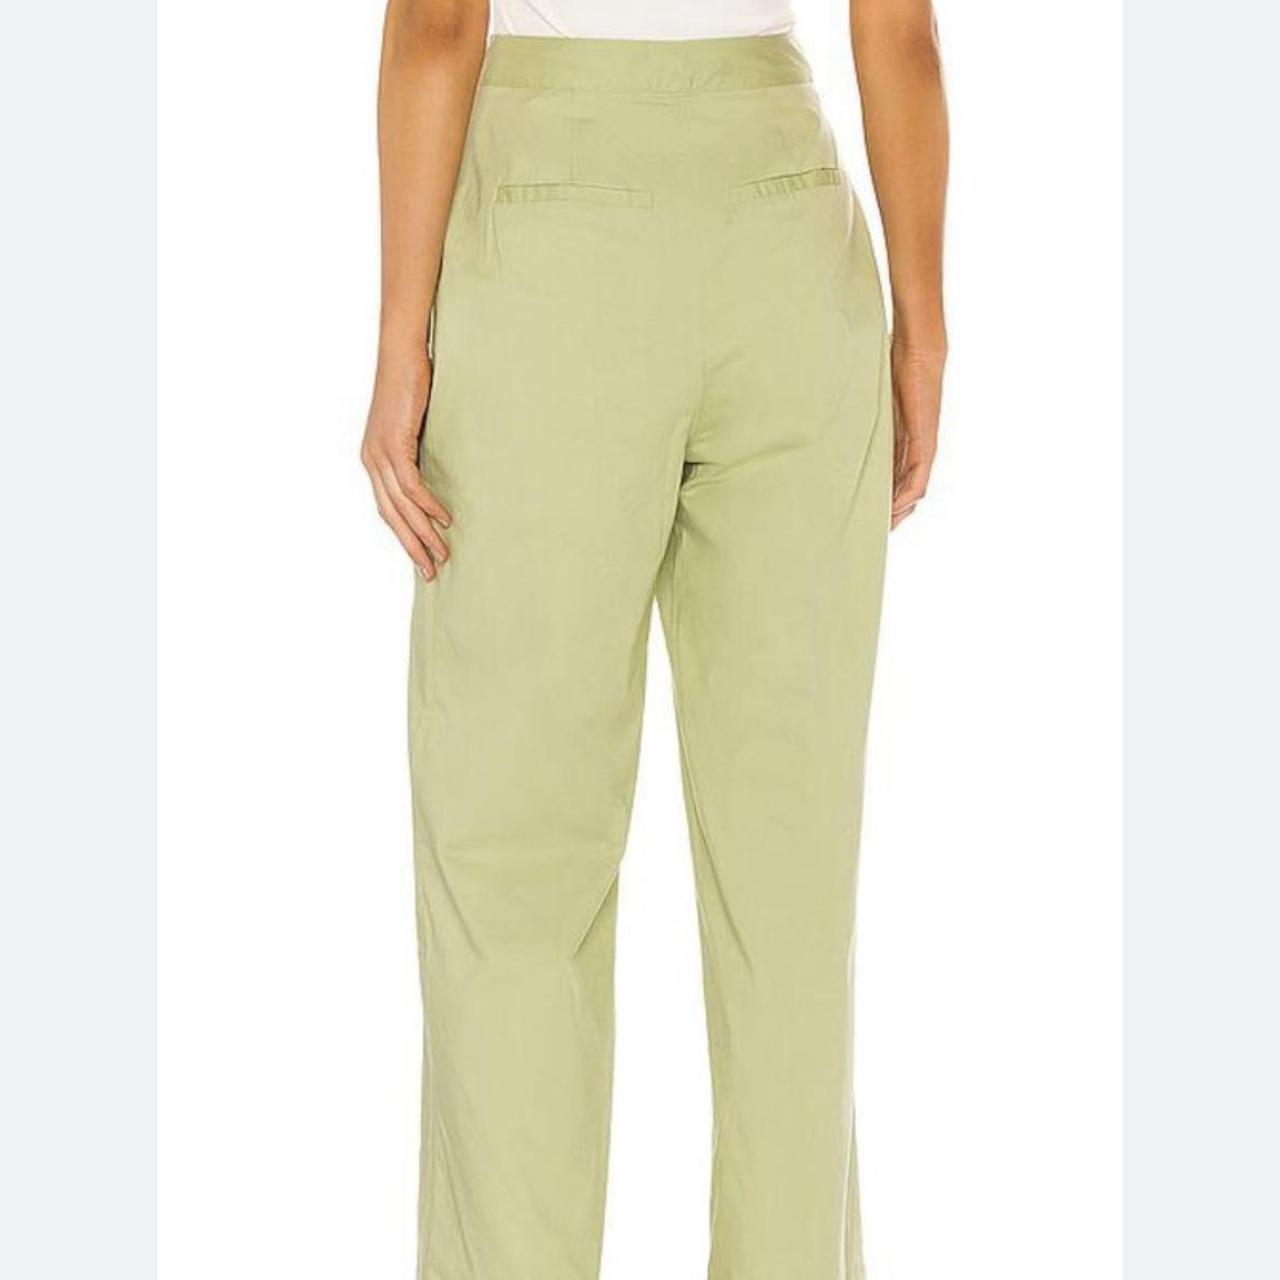 House of Harlow Women's Trousers (2)